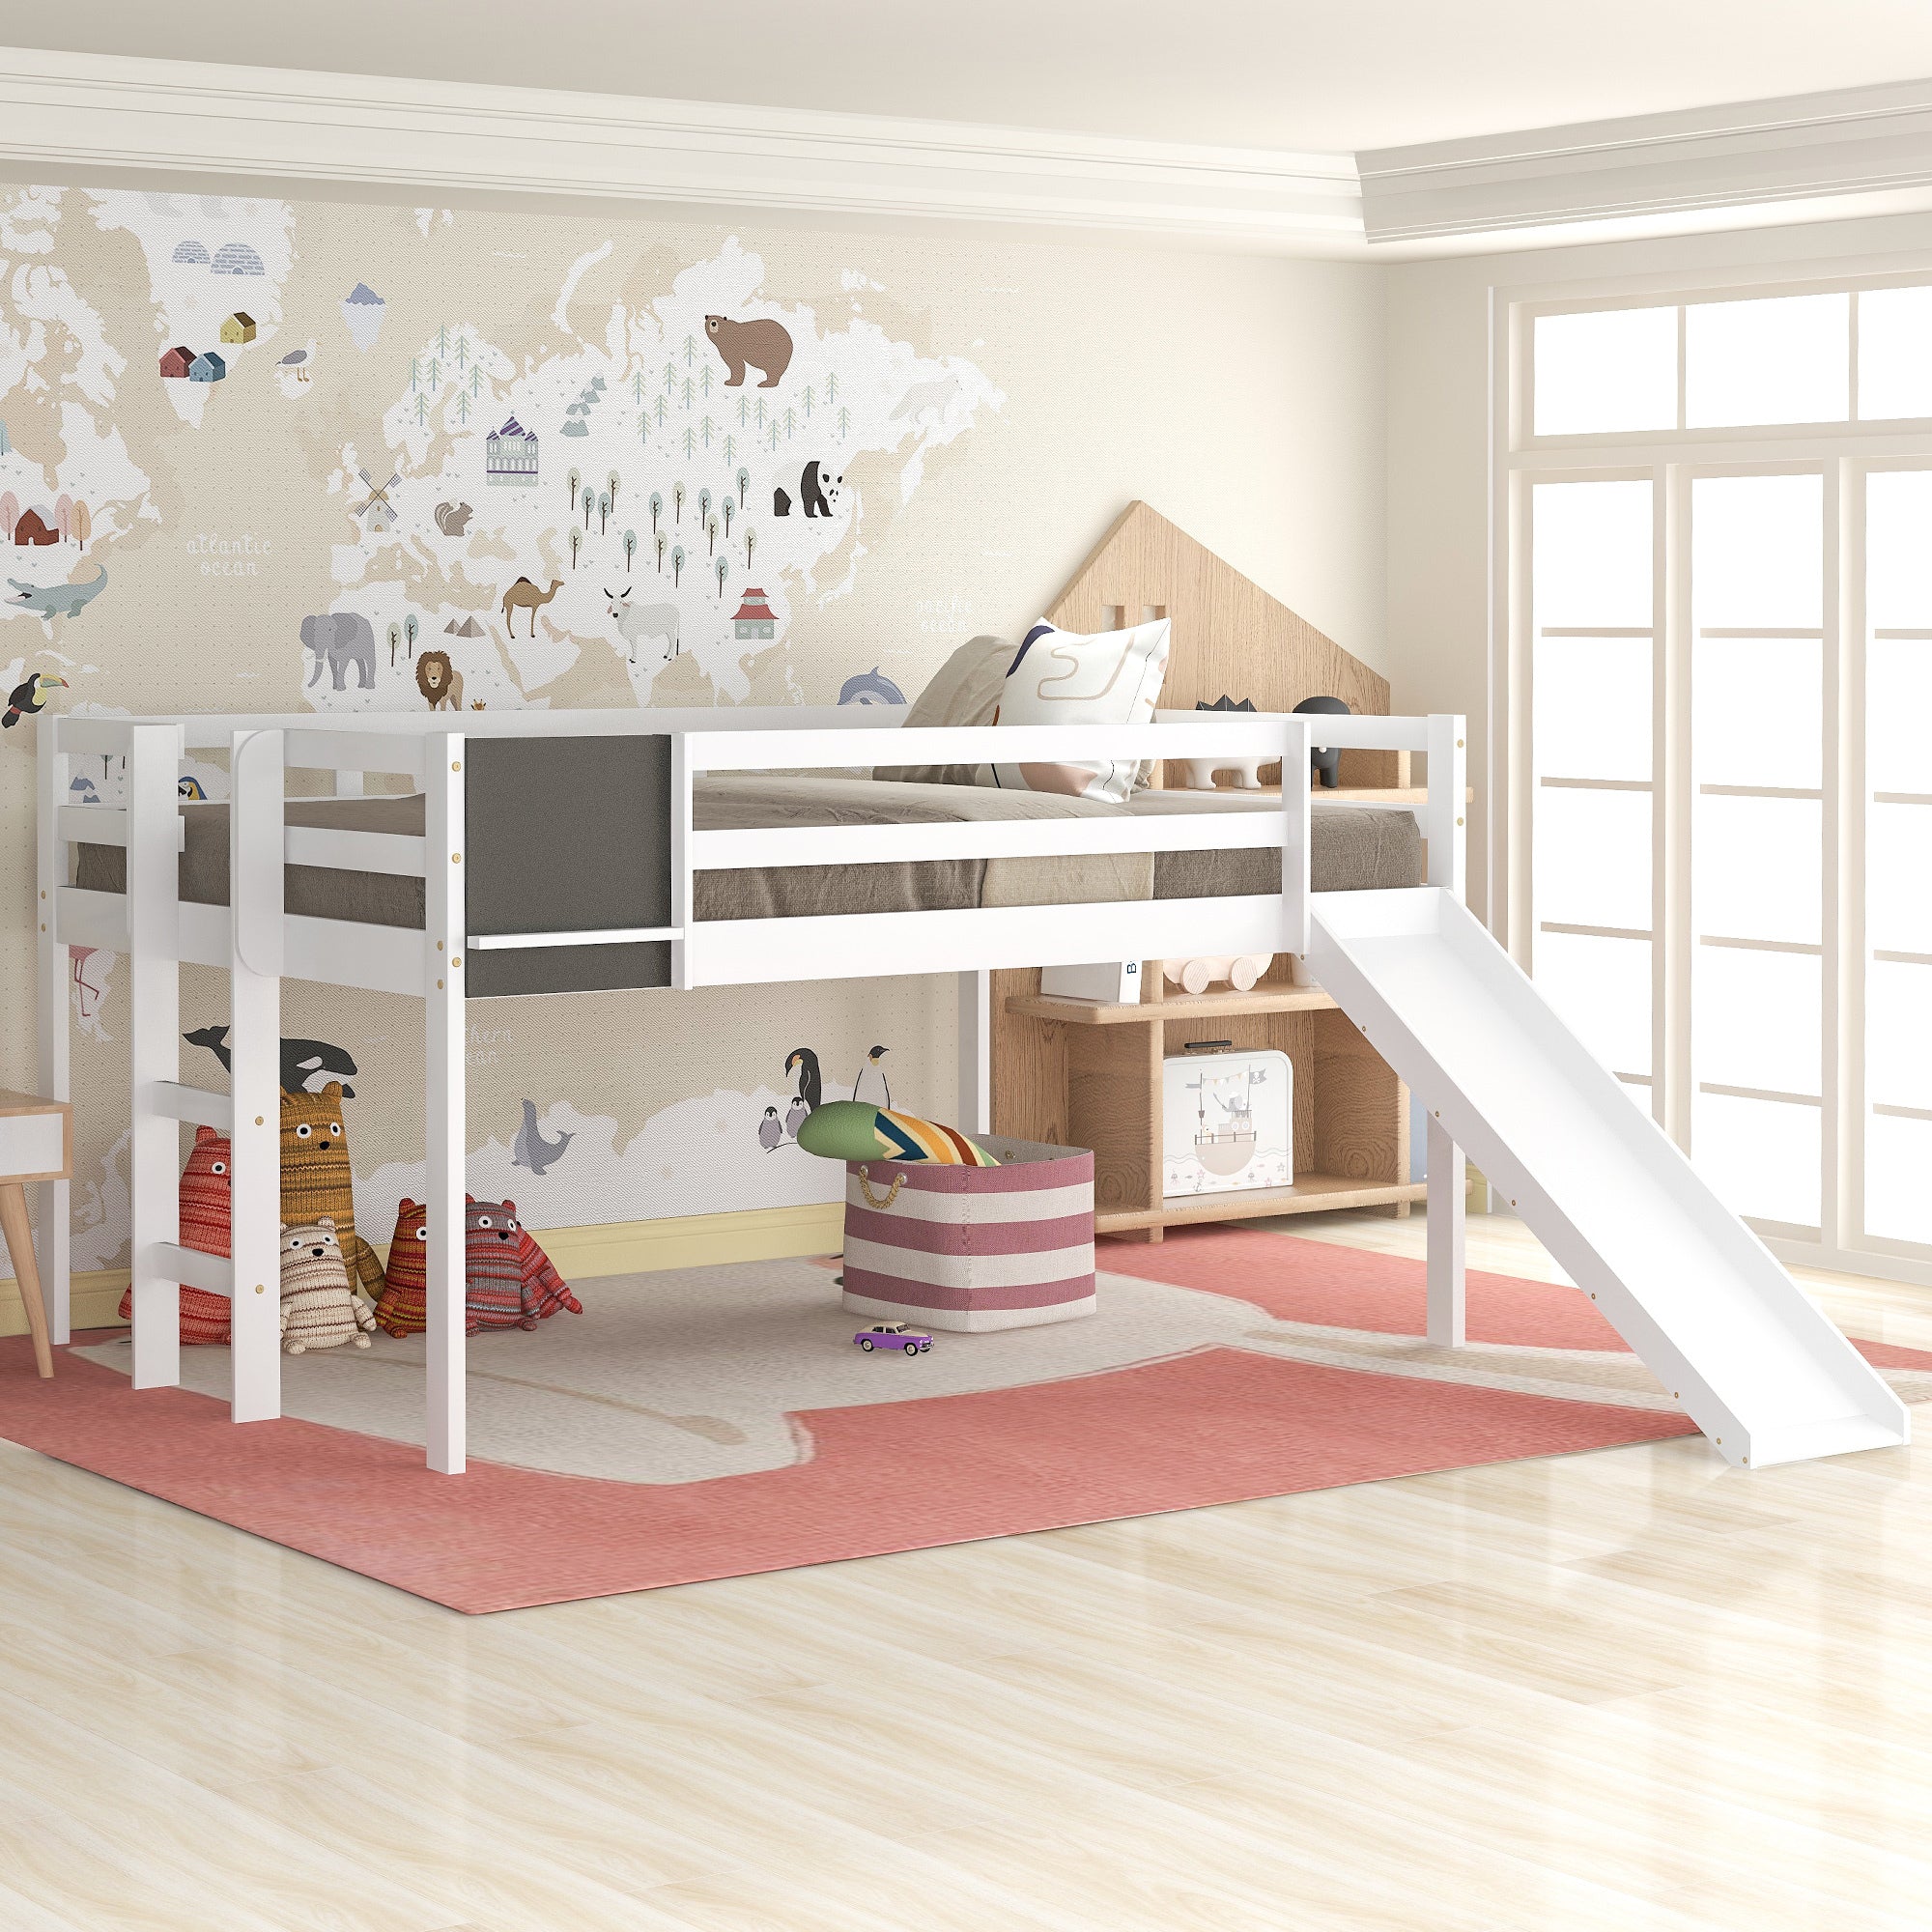 Full size Loft Bed Wood Bed with Slide (White)